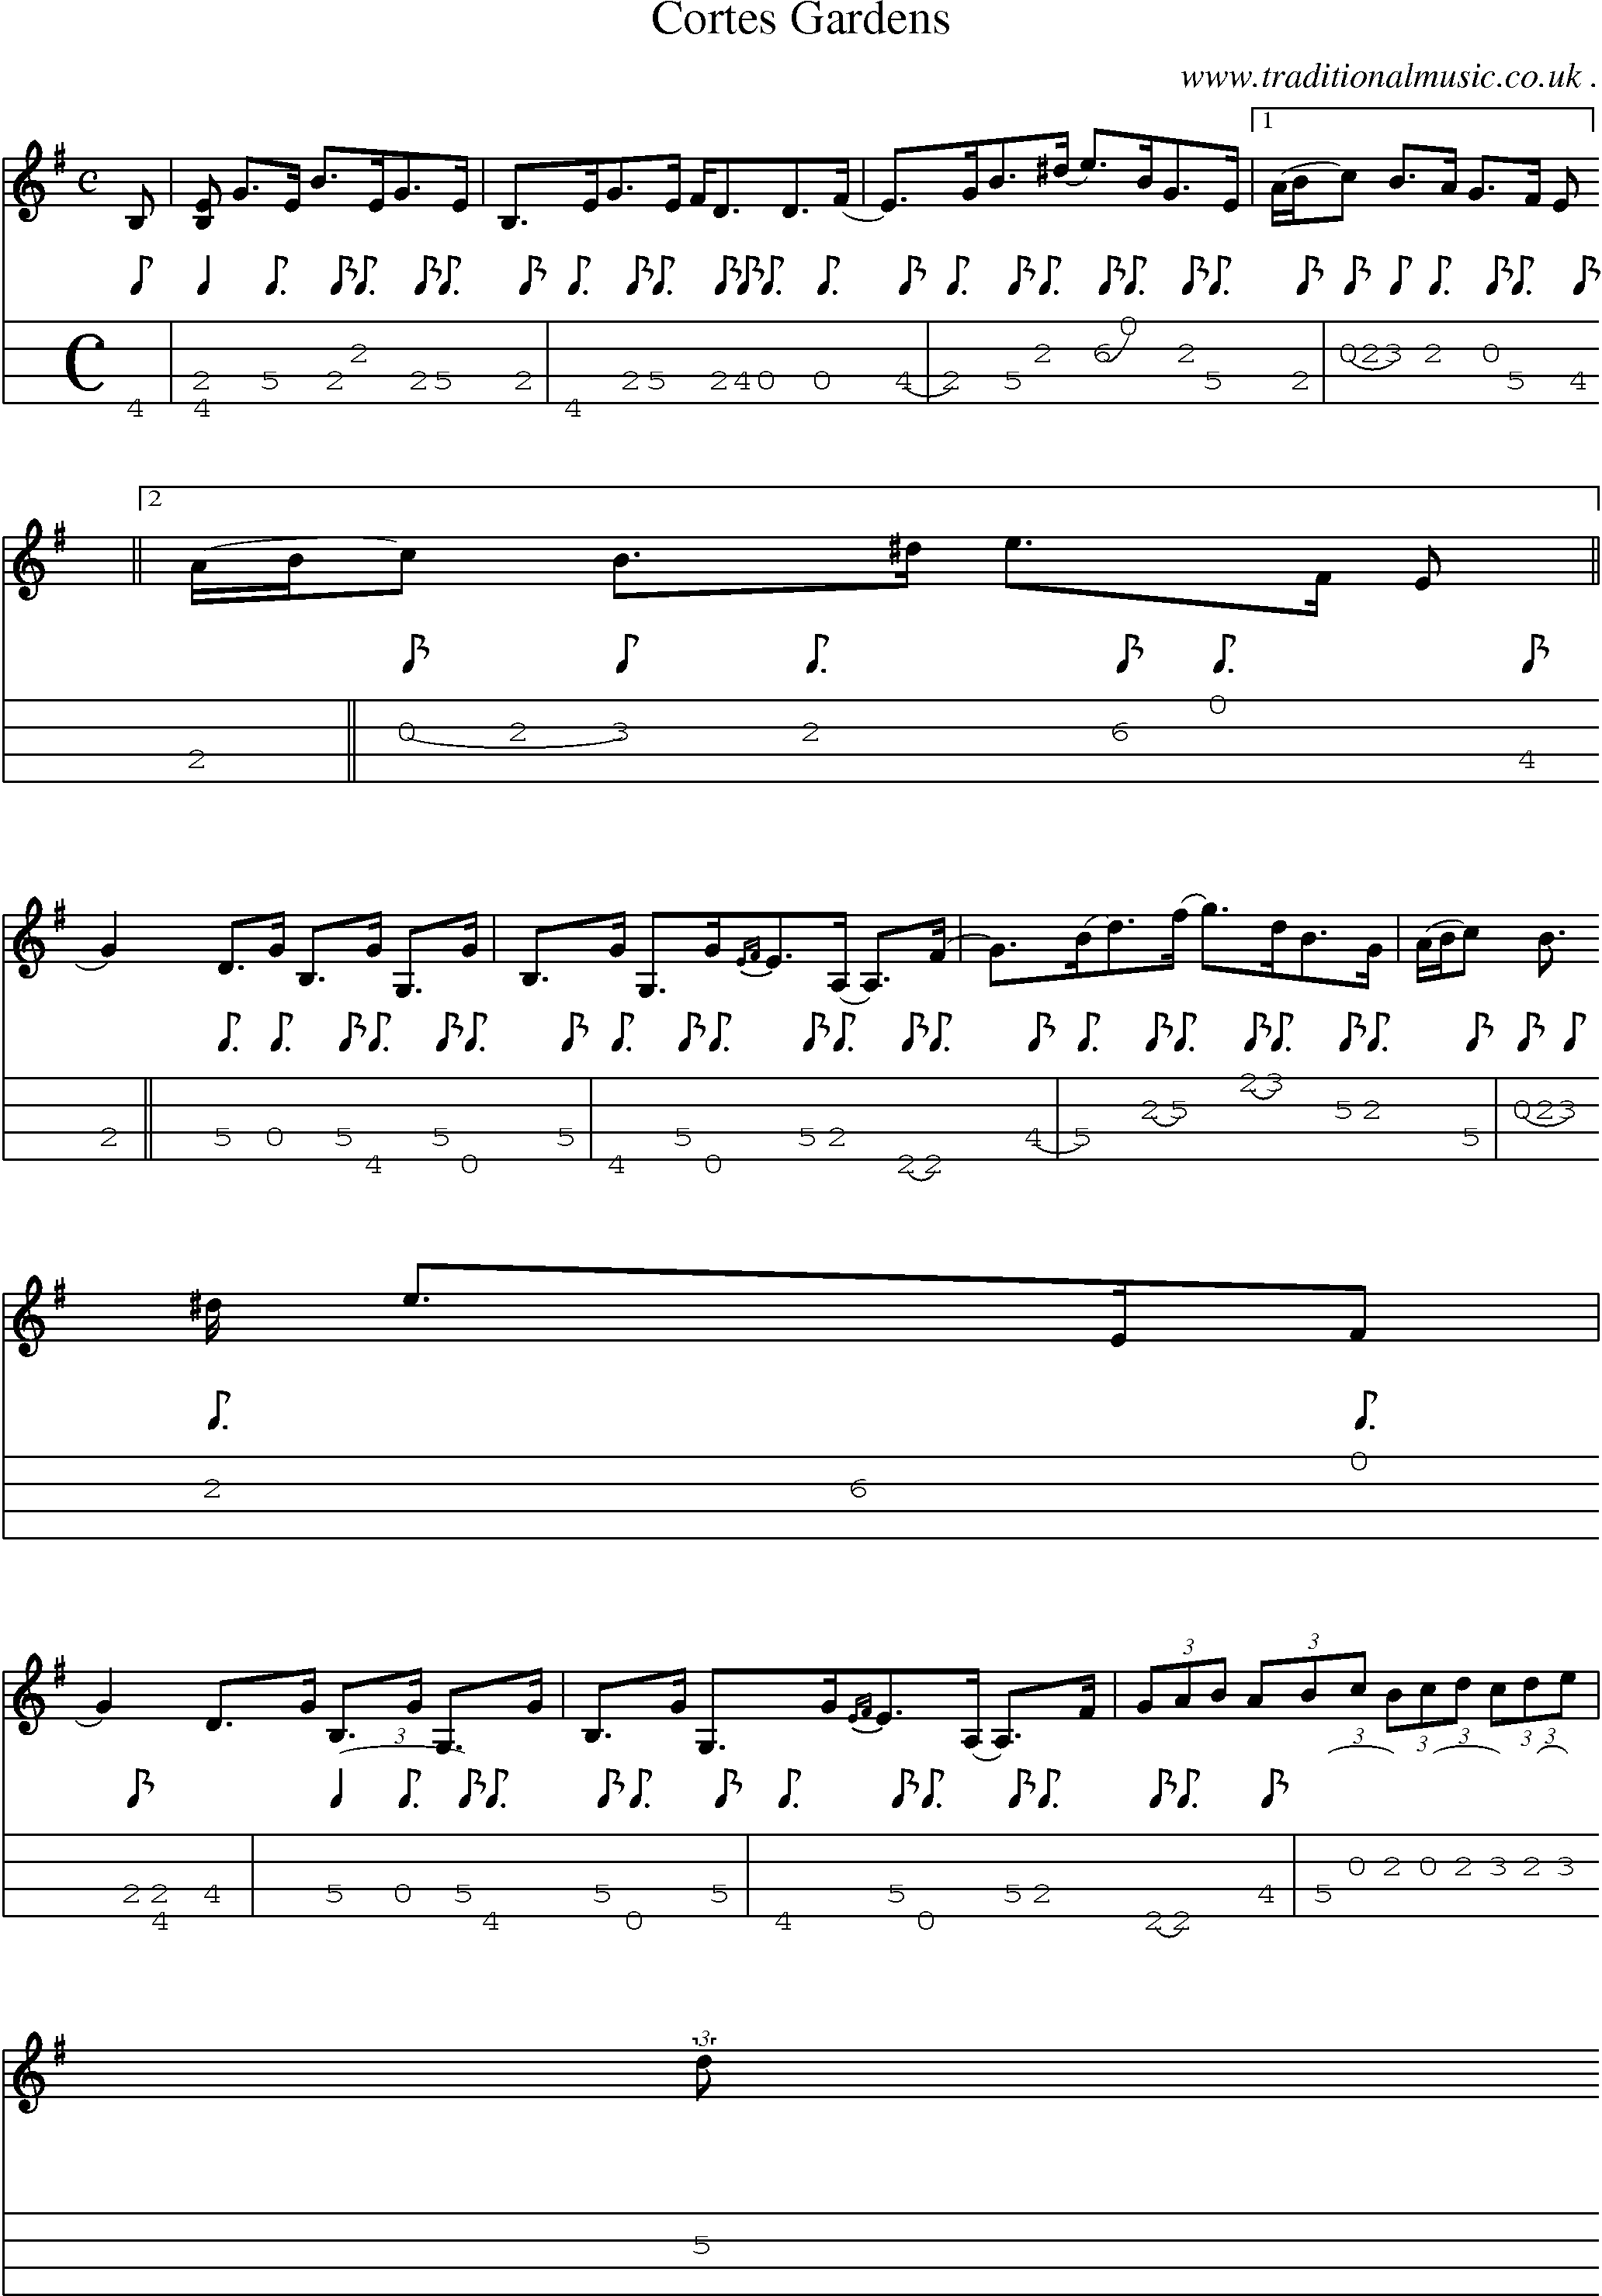 Sheet-music  score, Chords and Mandolin Tabs for Cortes Gardens